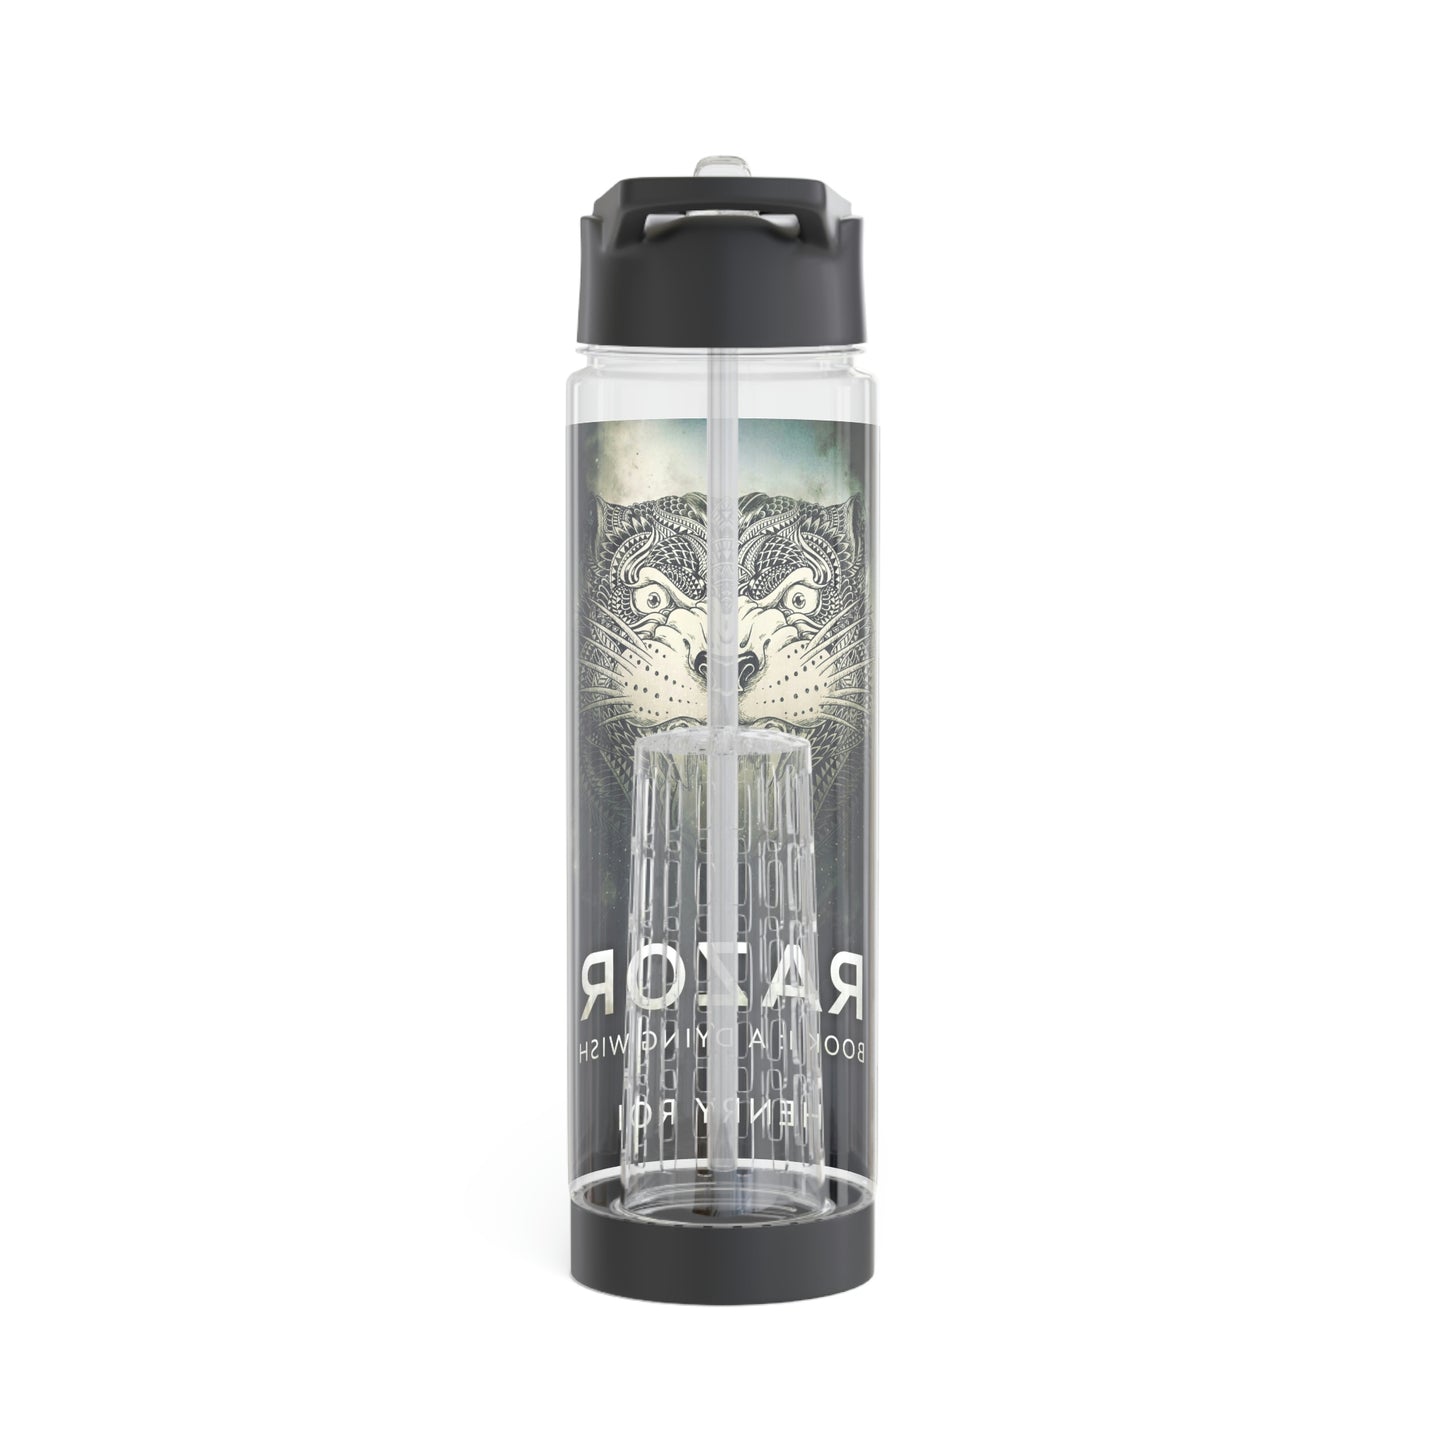 A Dying Wish - Infuser Water Bottle